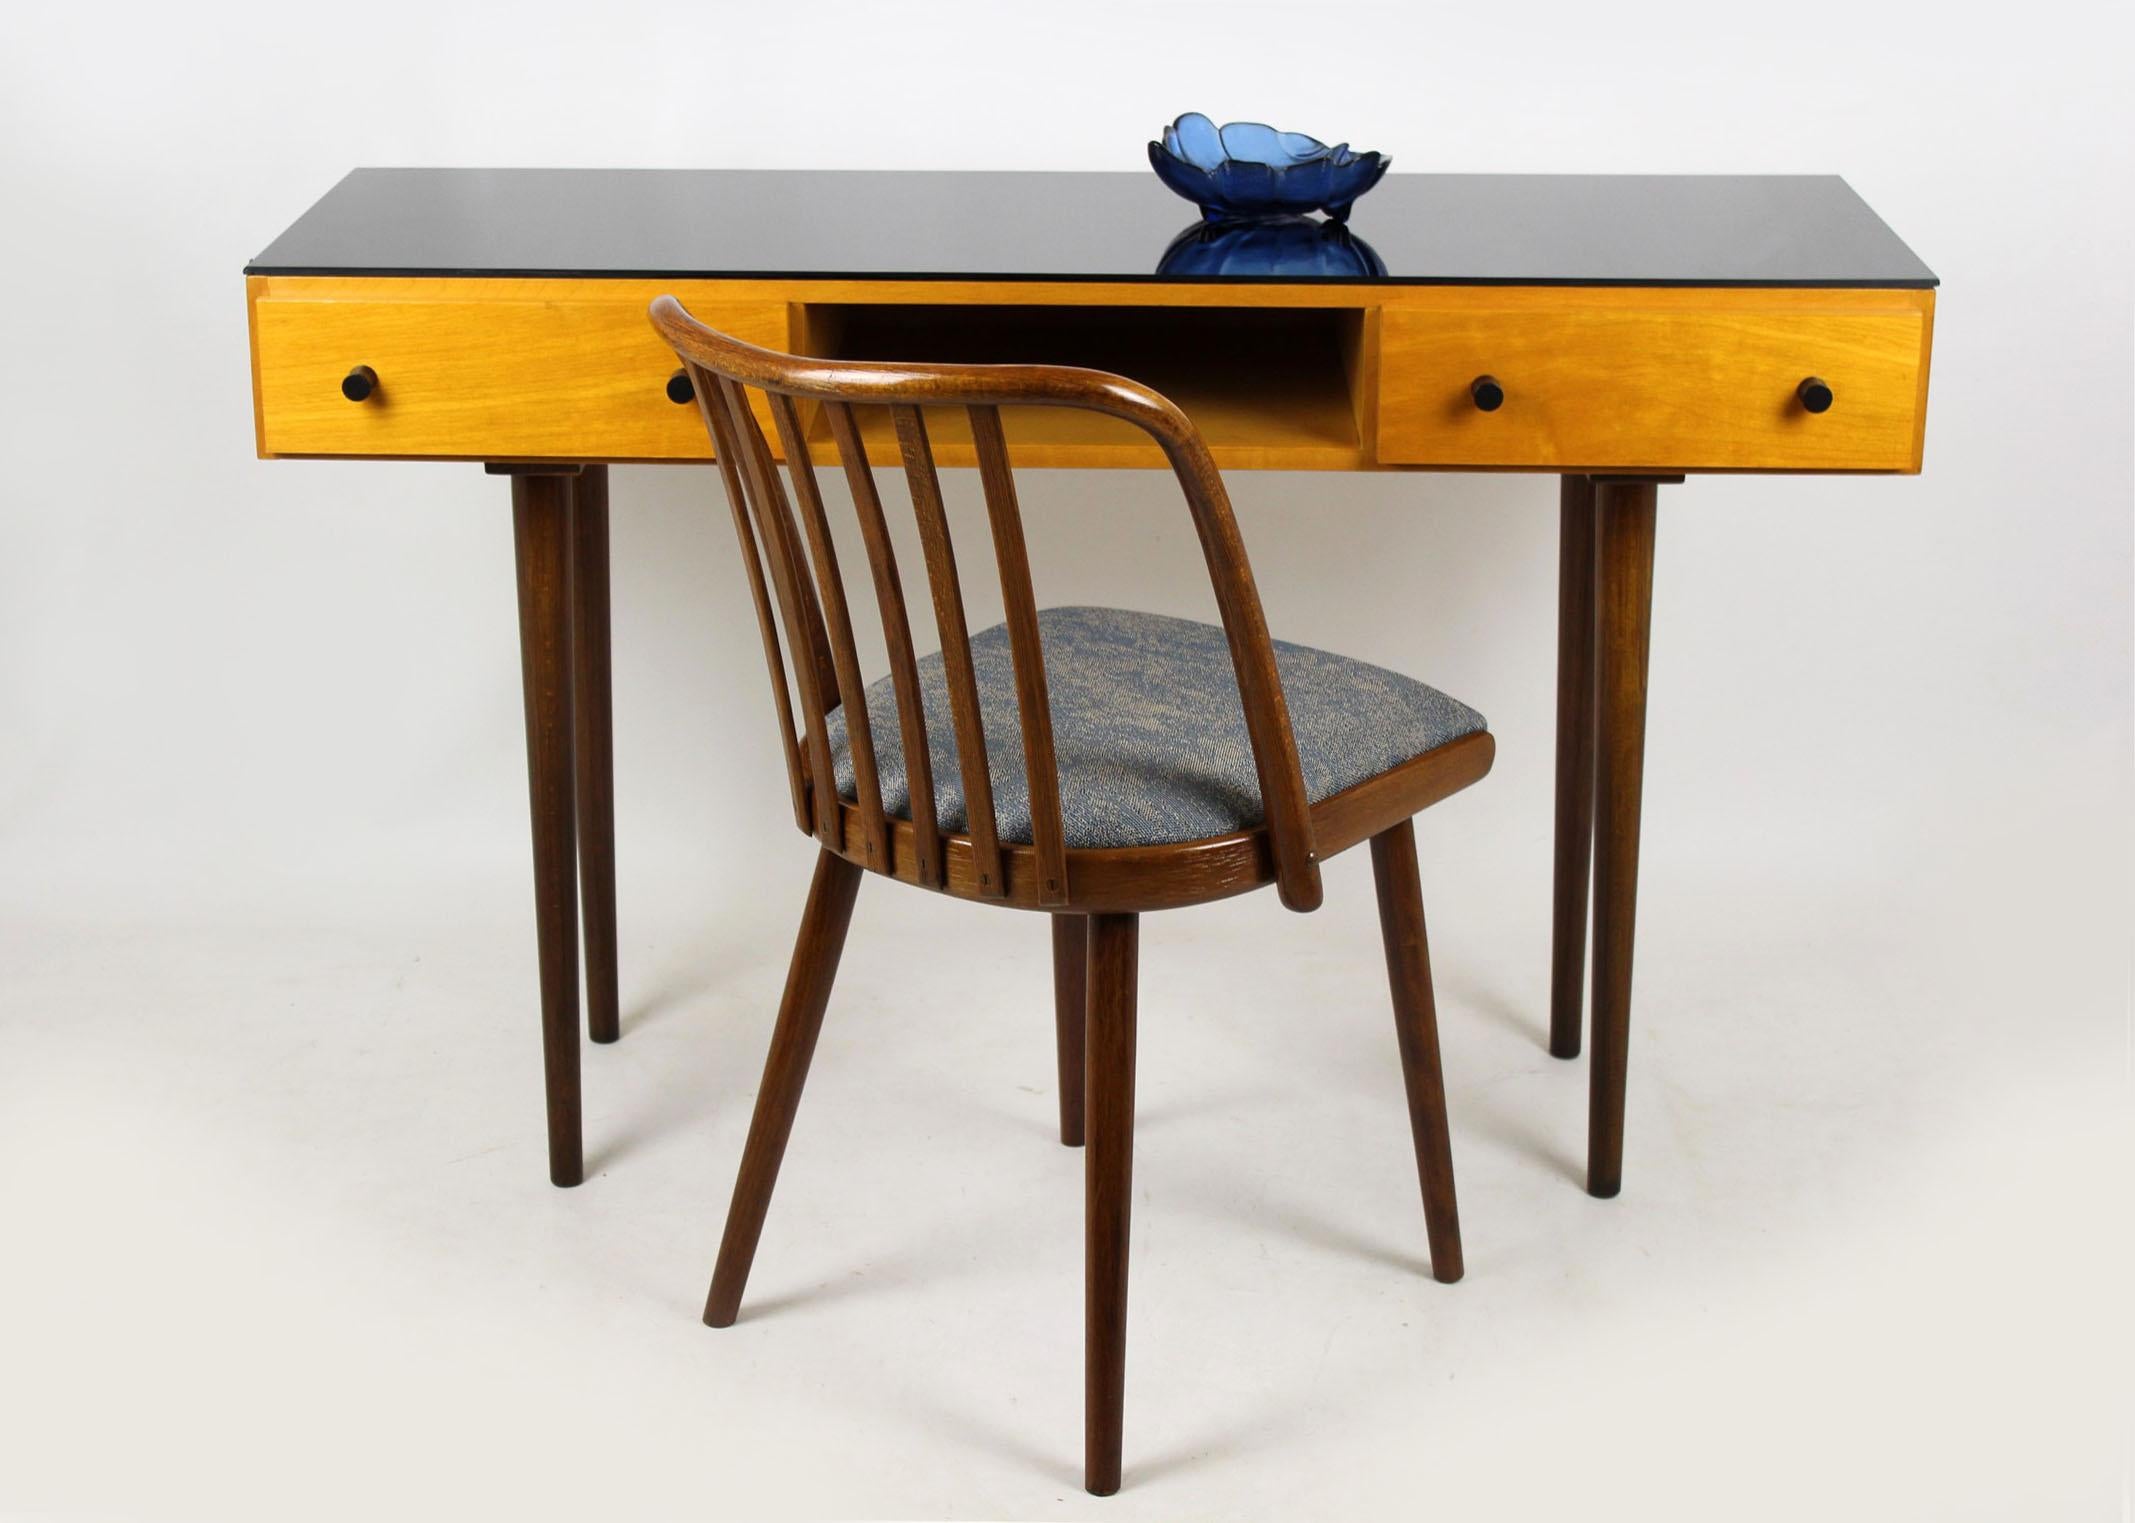 Midcentury small desk which can also be used as a console table. Designed by Mojmír Požár in 1957 and manufactured by UP Bucovice in former Czechoslovakia during the 1960s. Features two drawers, retains its original black glass on the top. Woodwork